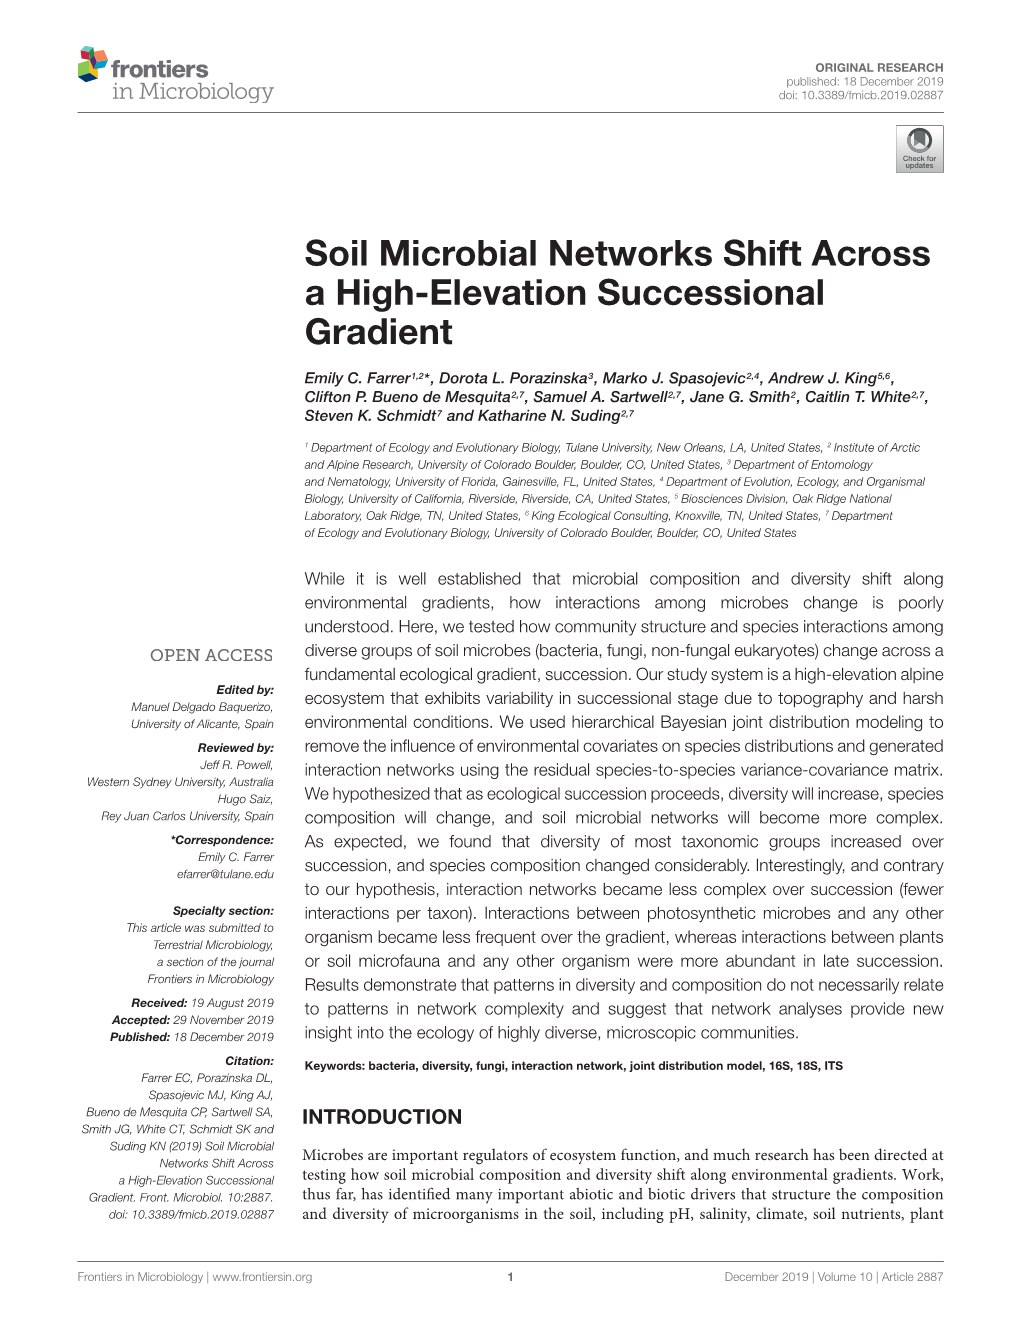 Soil Microbial Networks Shift Across a High-Elevation Successional Gradient